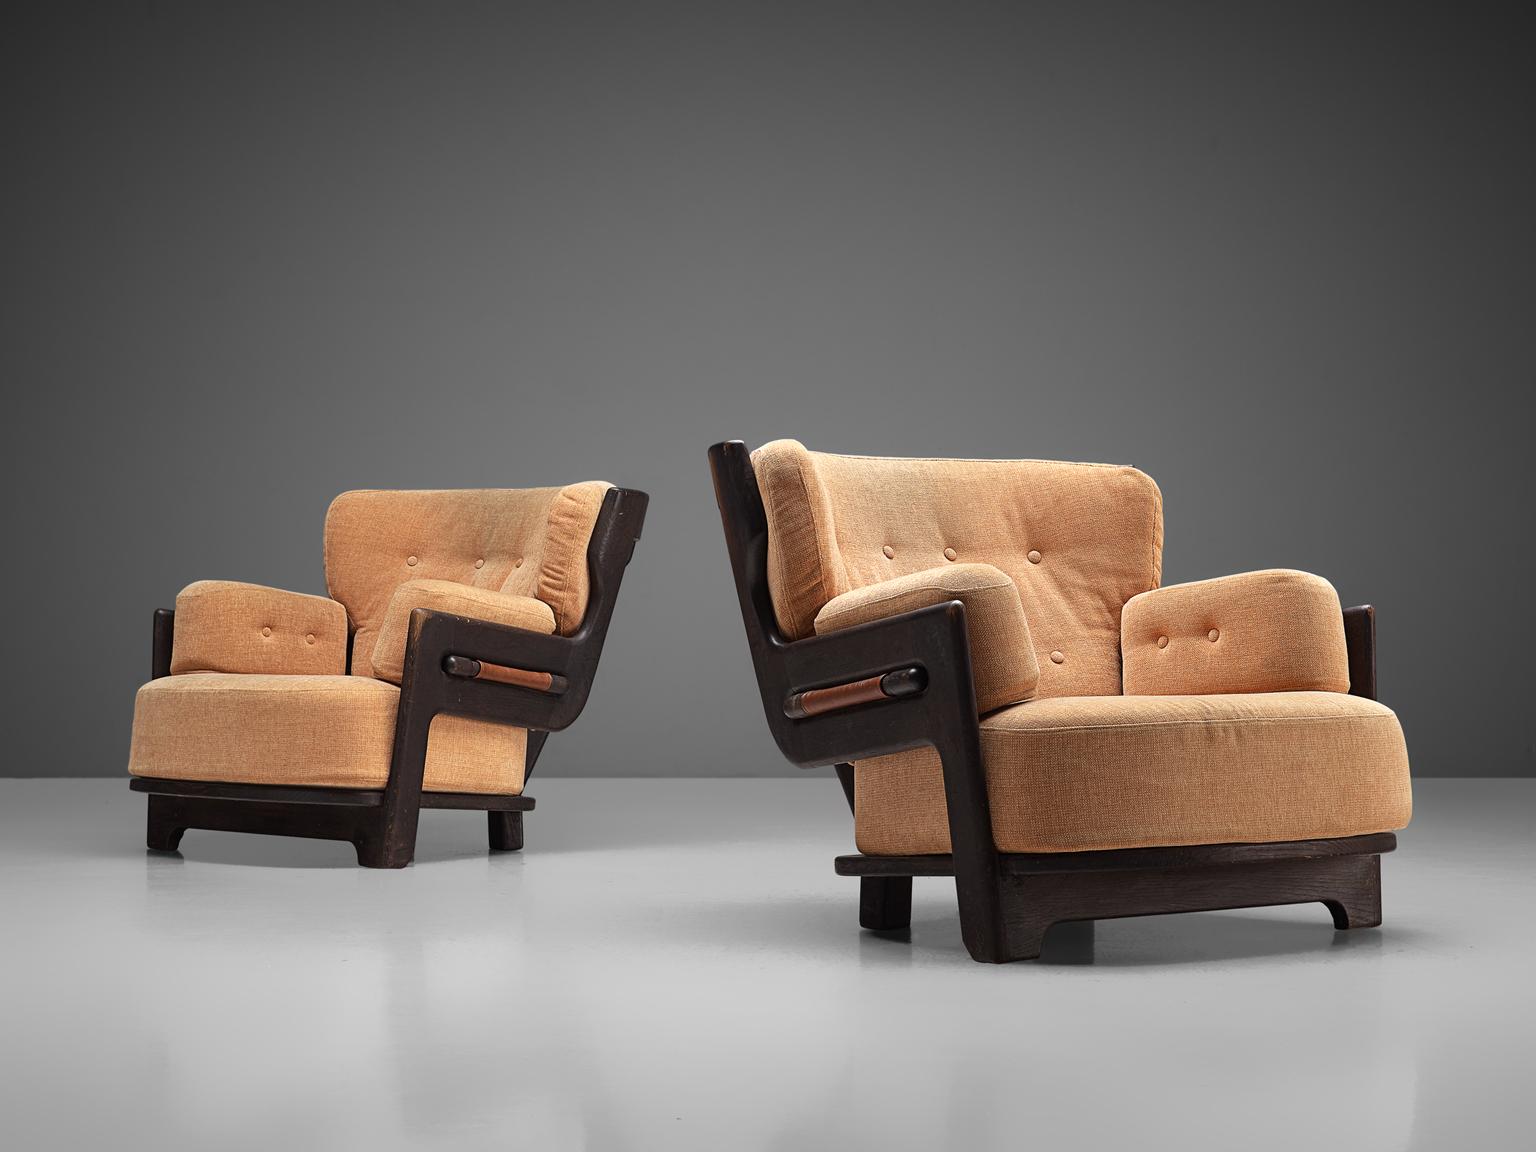 Guillerme & Chambron for Votre Maison, set 2 of 'Denis' lounge chairs, fabric and oak, France, 1960s.

Set of two extraordinary Guillerme and Chambron lounge chairs in darkened, solid oak with the typical characteristic decorative details at the